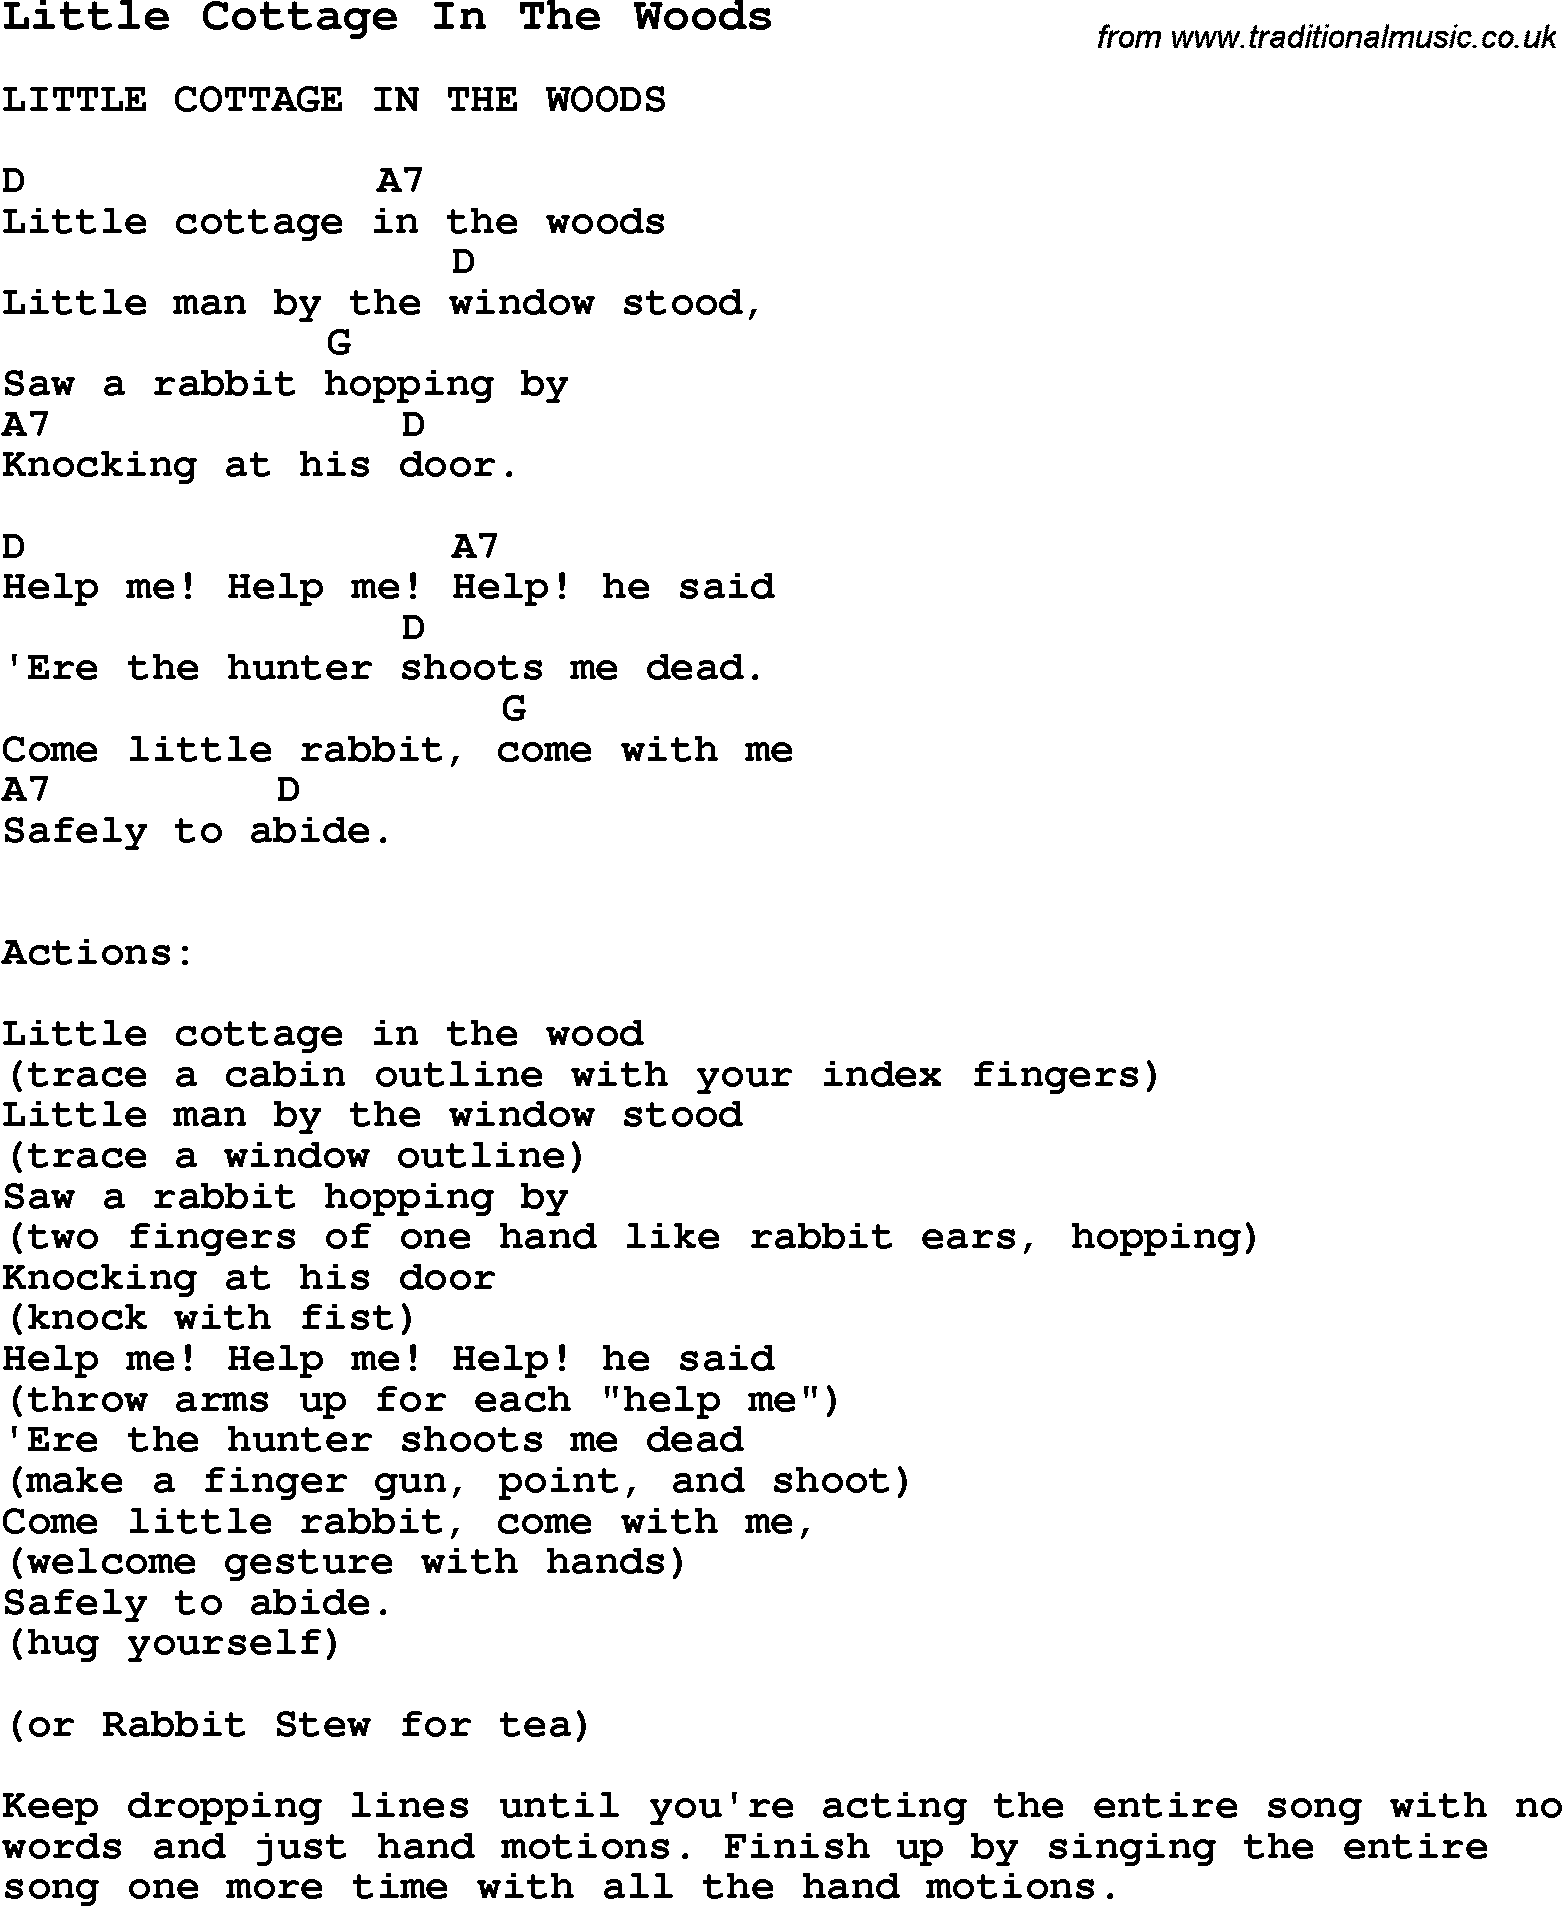 Summer-Camp Song, Little Cottage In The Woods, with lyrics and chords for Ukulele, Guitar Banjo etc.